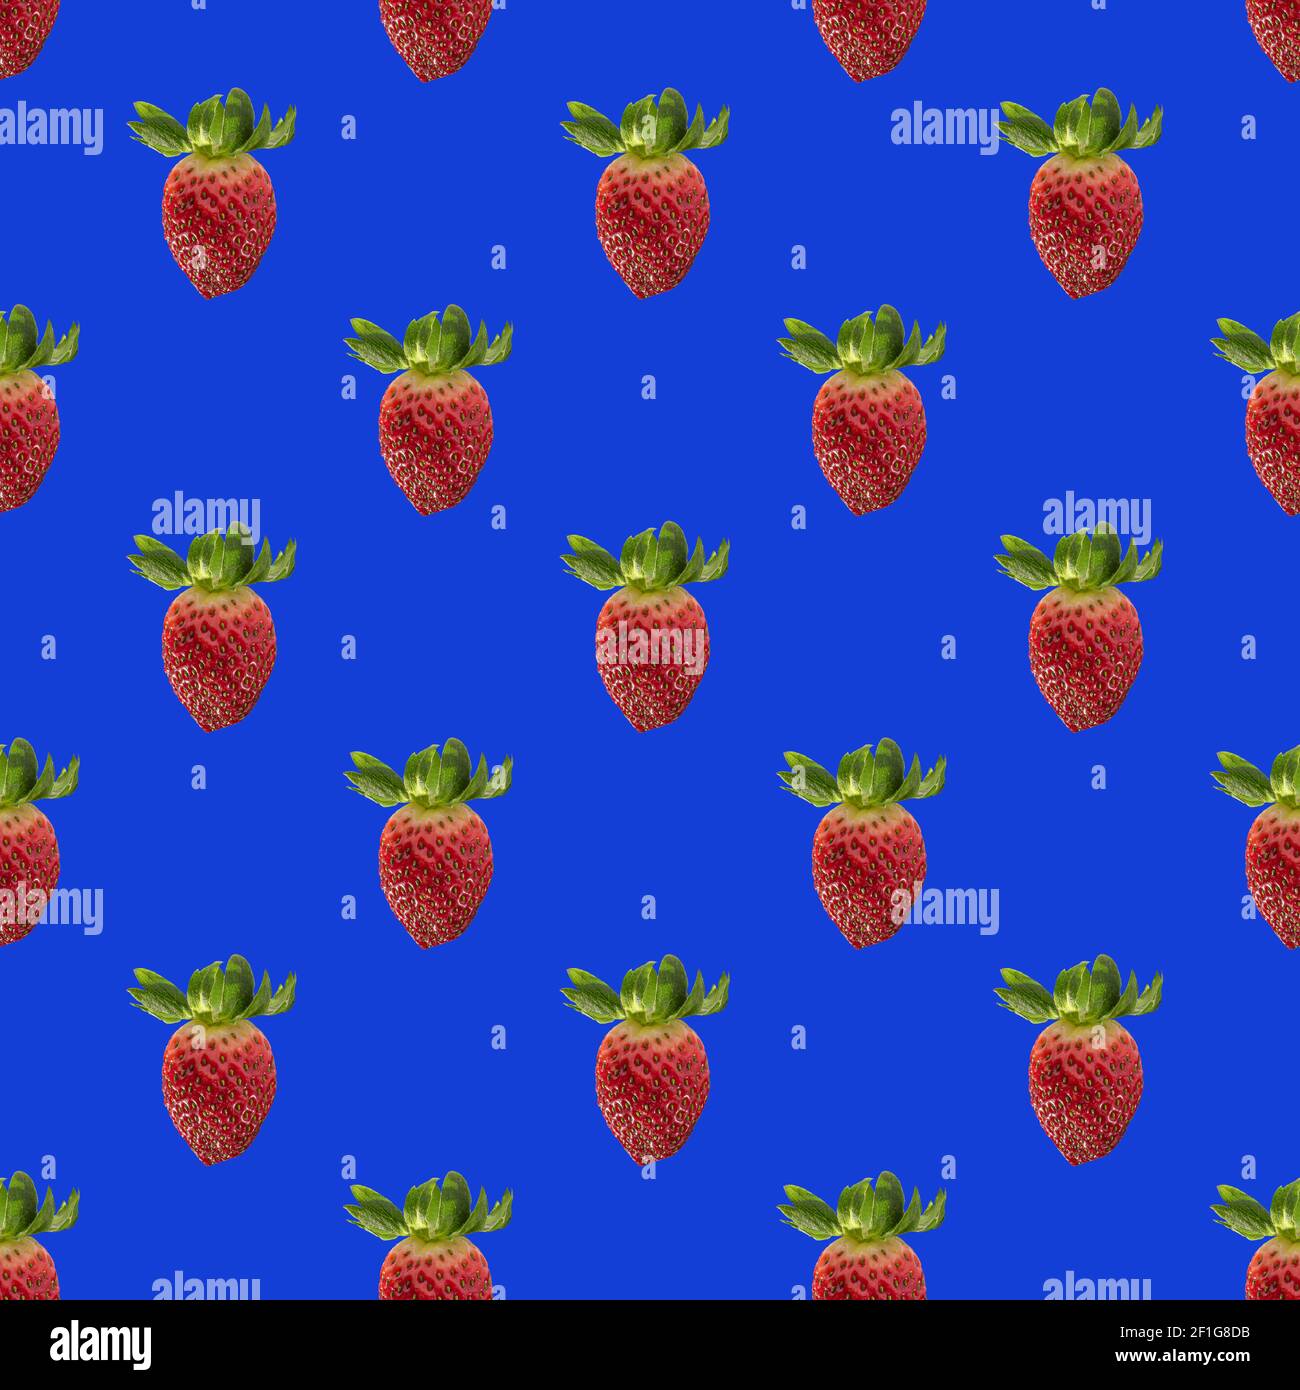 Seamless pattern with whole fresh beautiful red strawberries on solid bright blue background. Strawberries in rows. Stock Photo